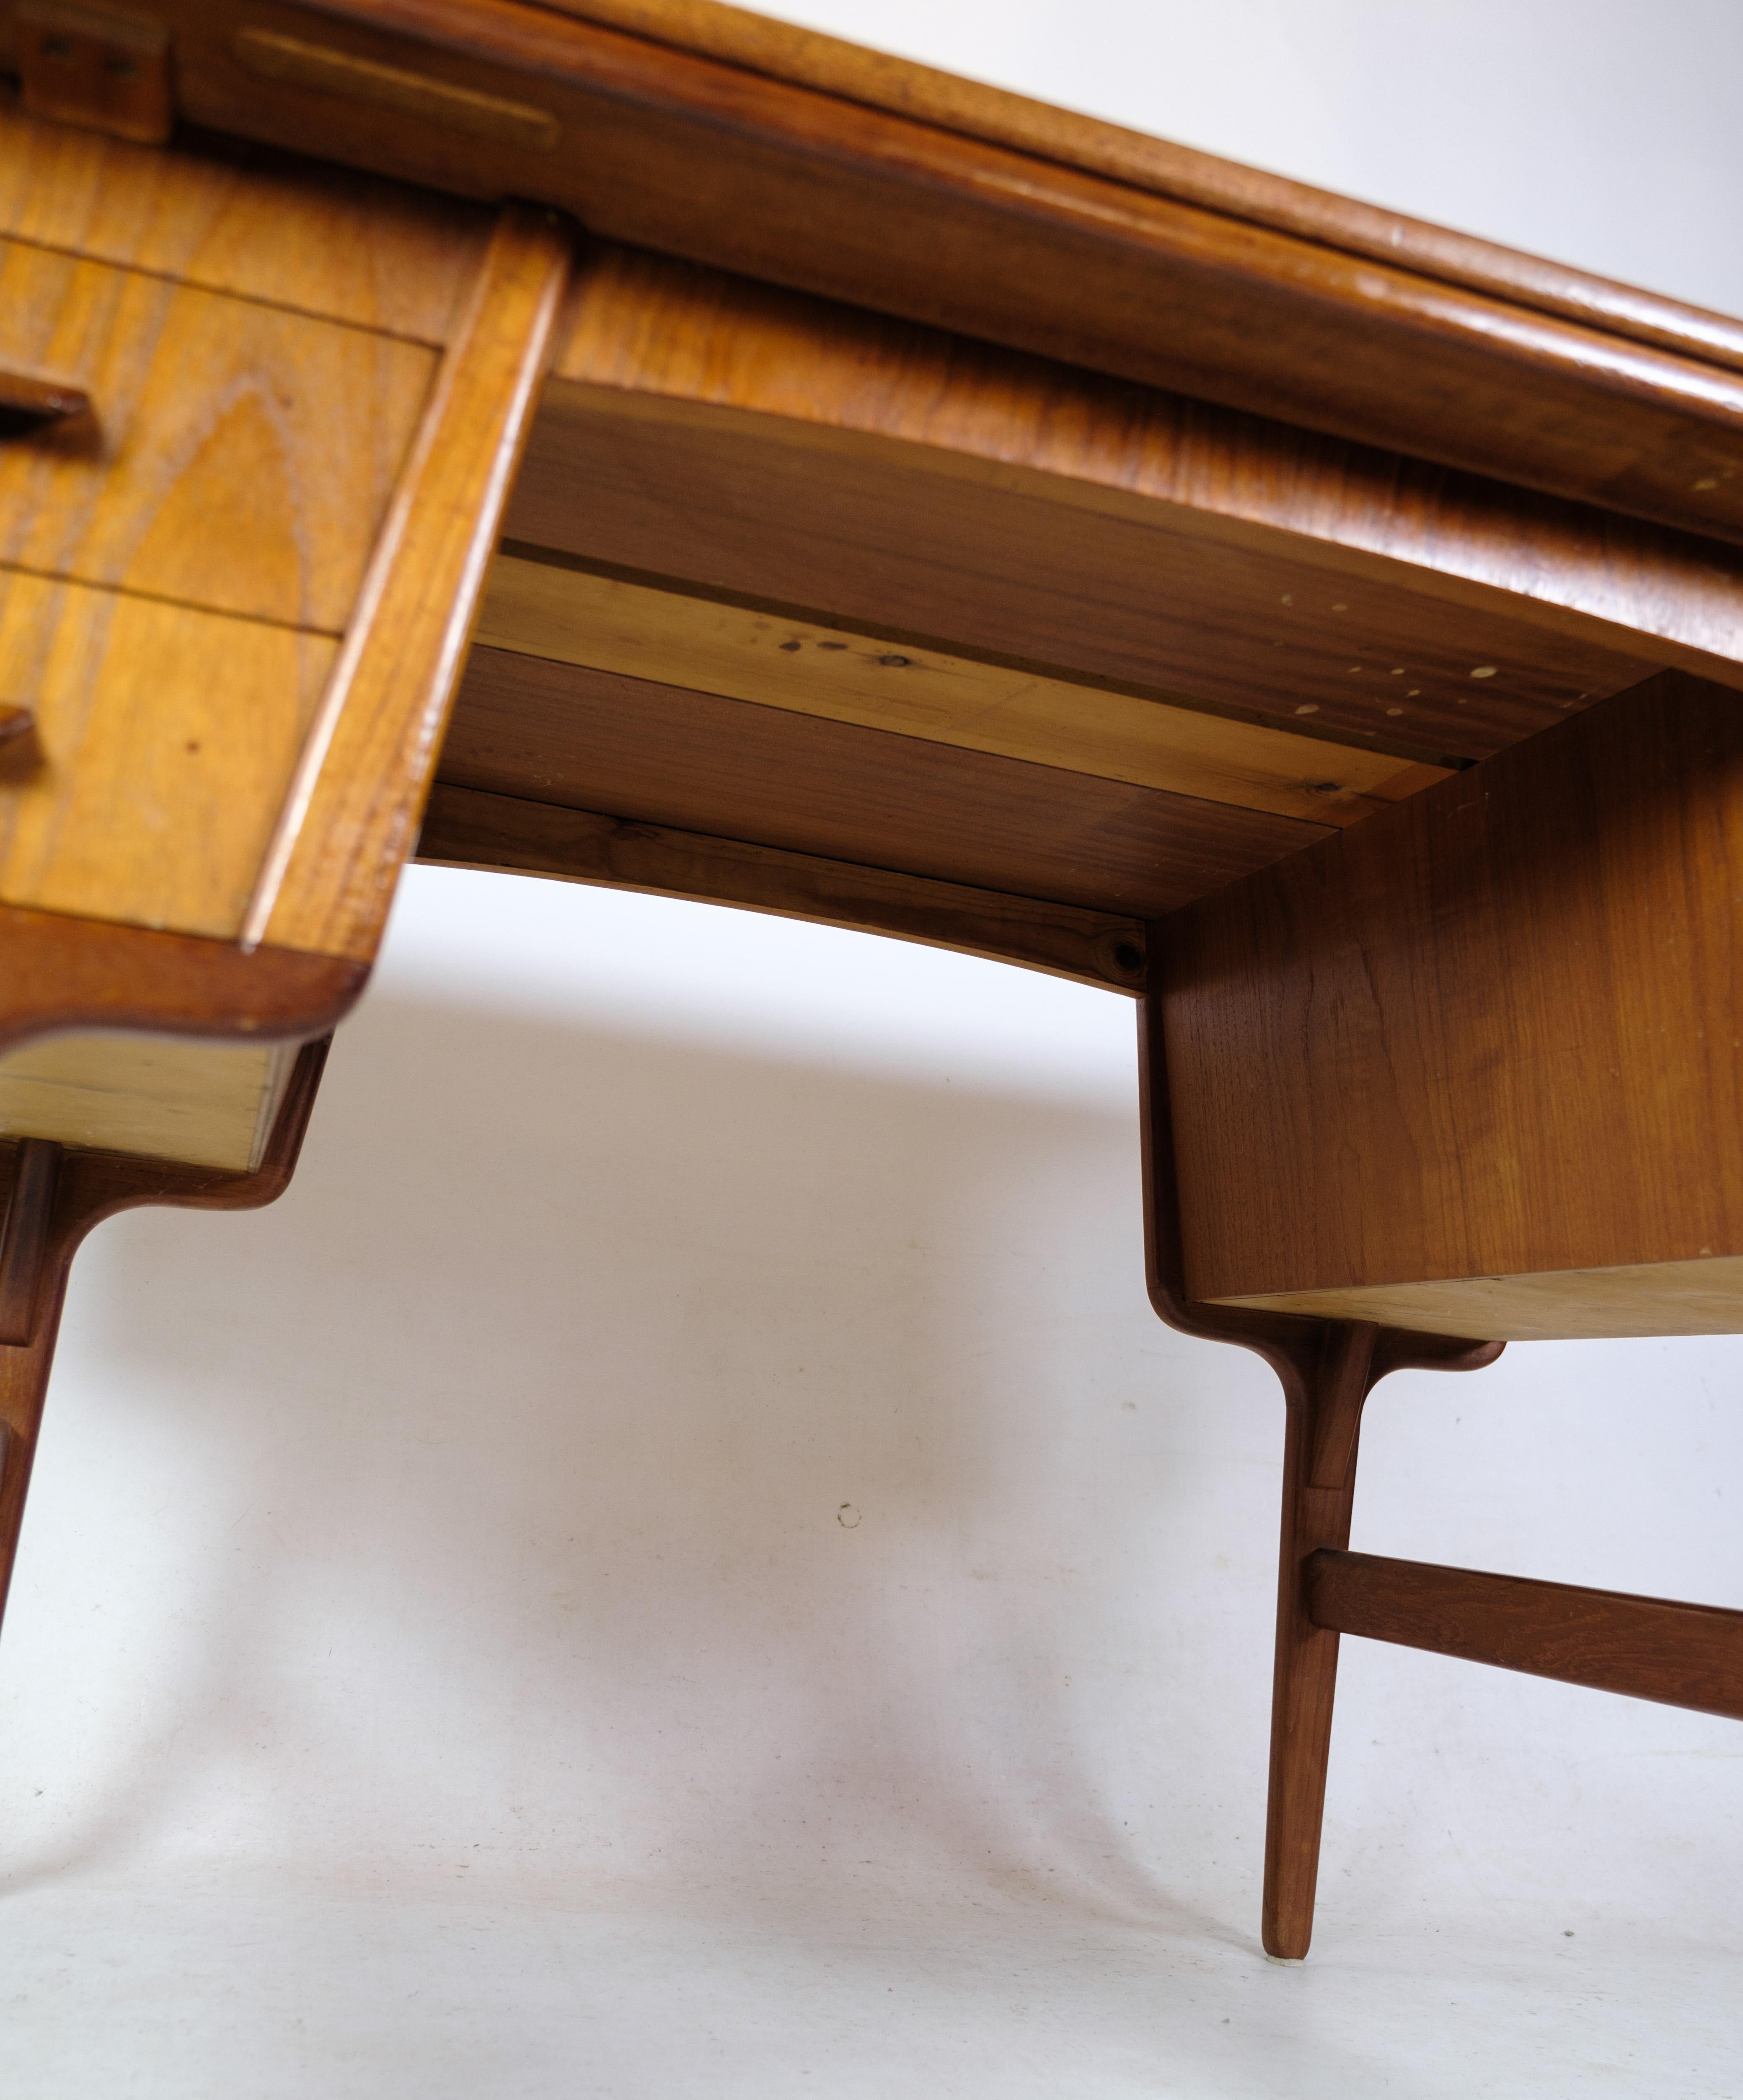 Mid-20th Century Desk / Dining Table in Teak Wood of Finnish Design from the 1960's